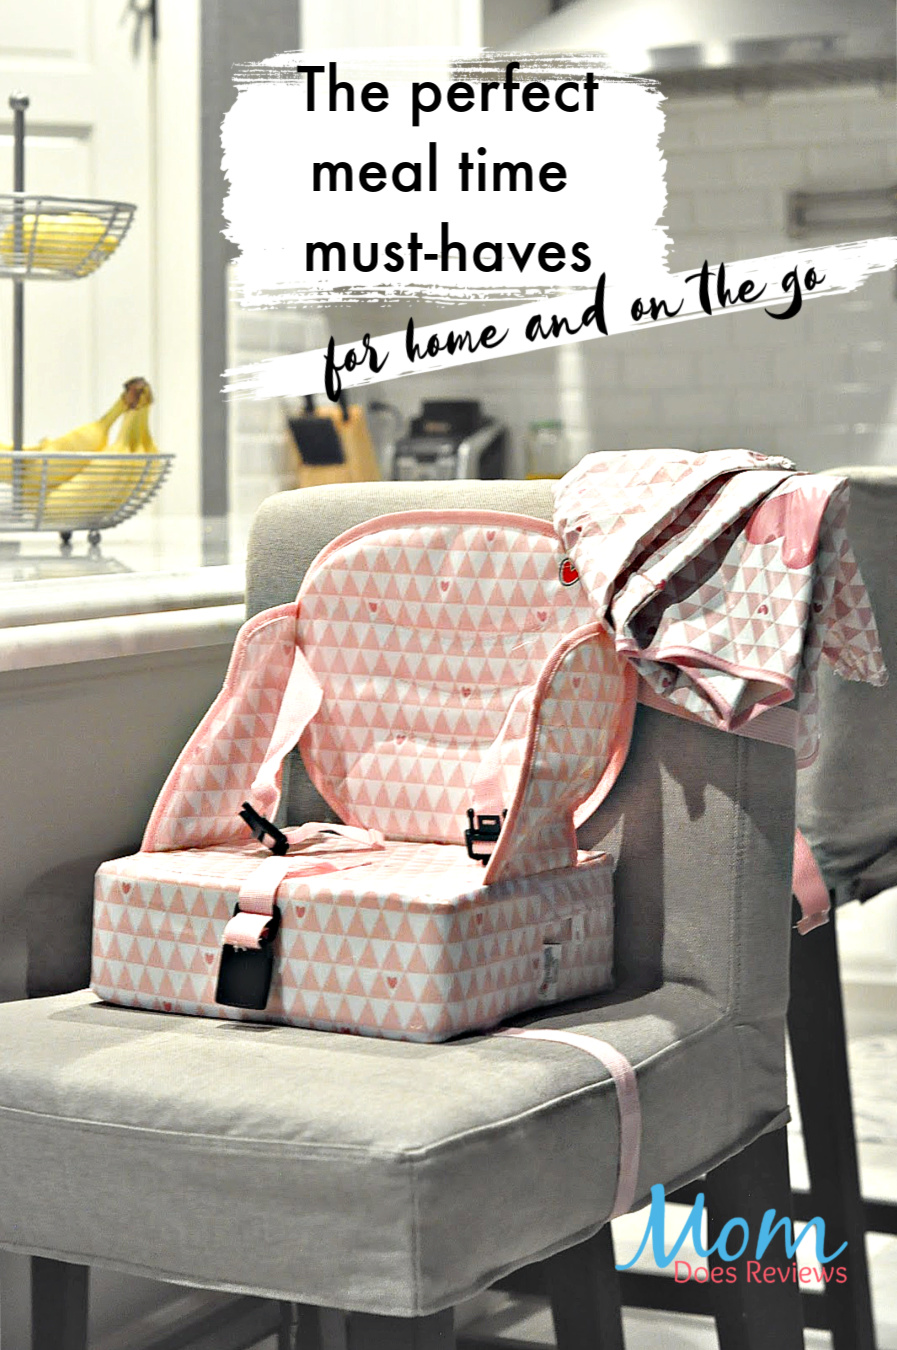 the perfect meal time must haves for baby. For home and on the go